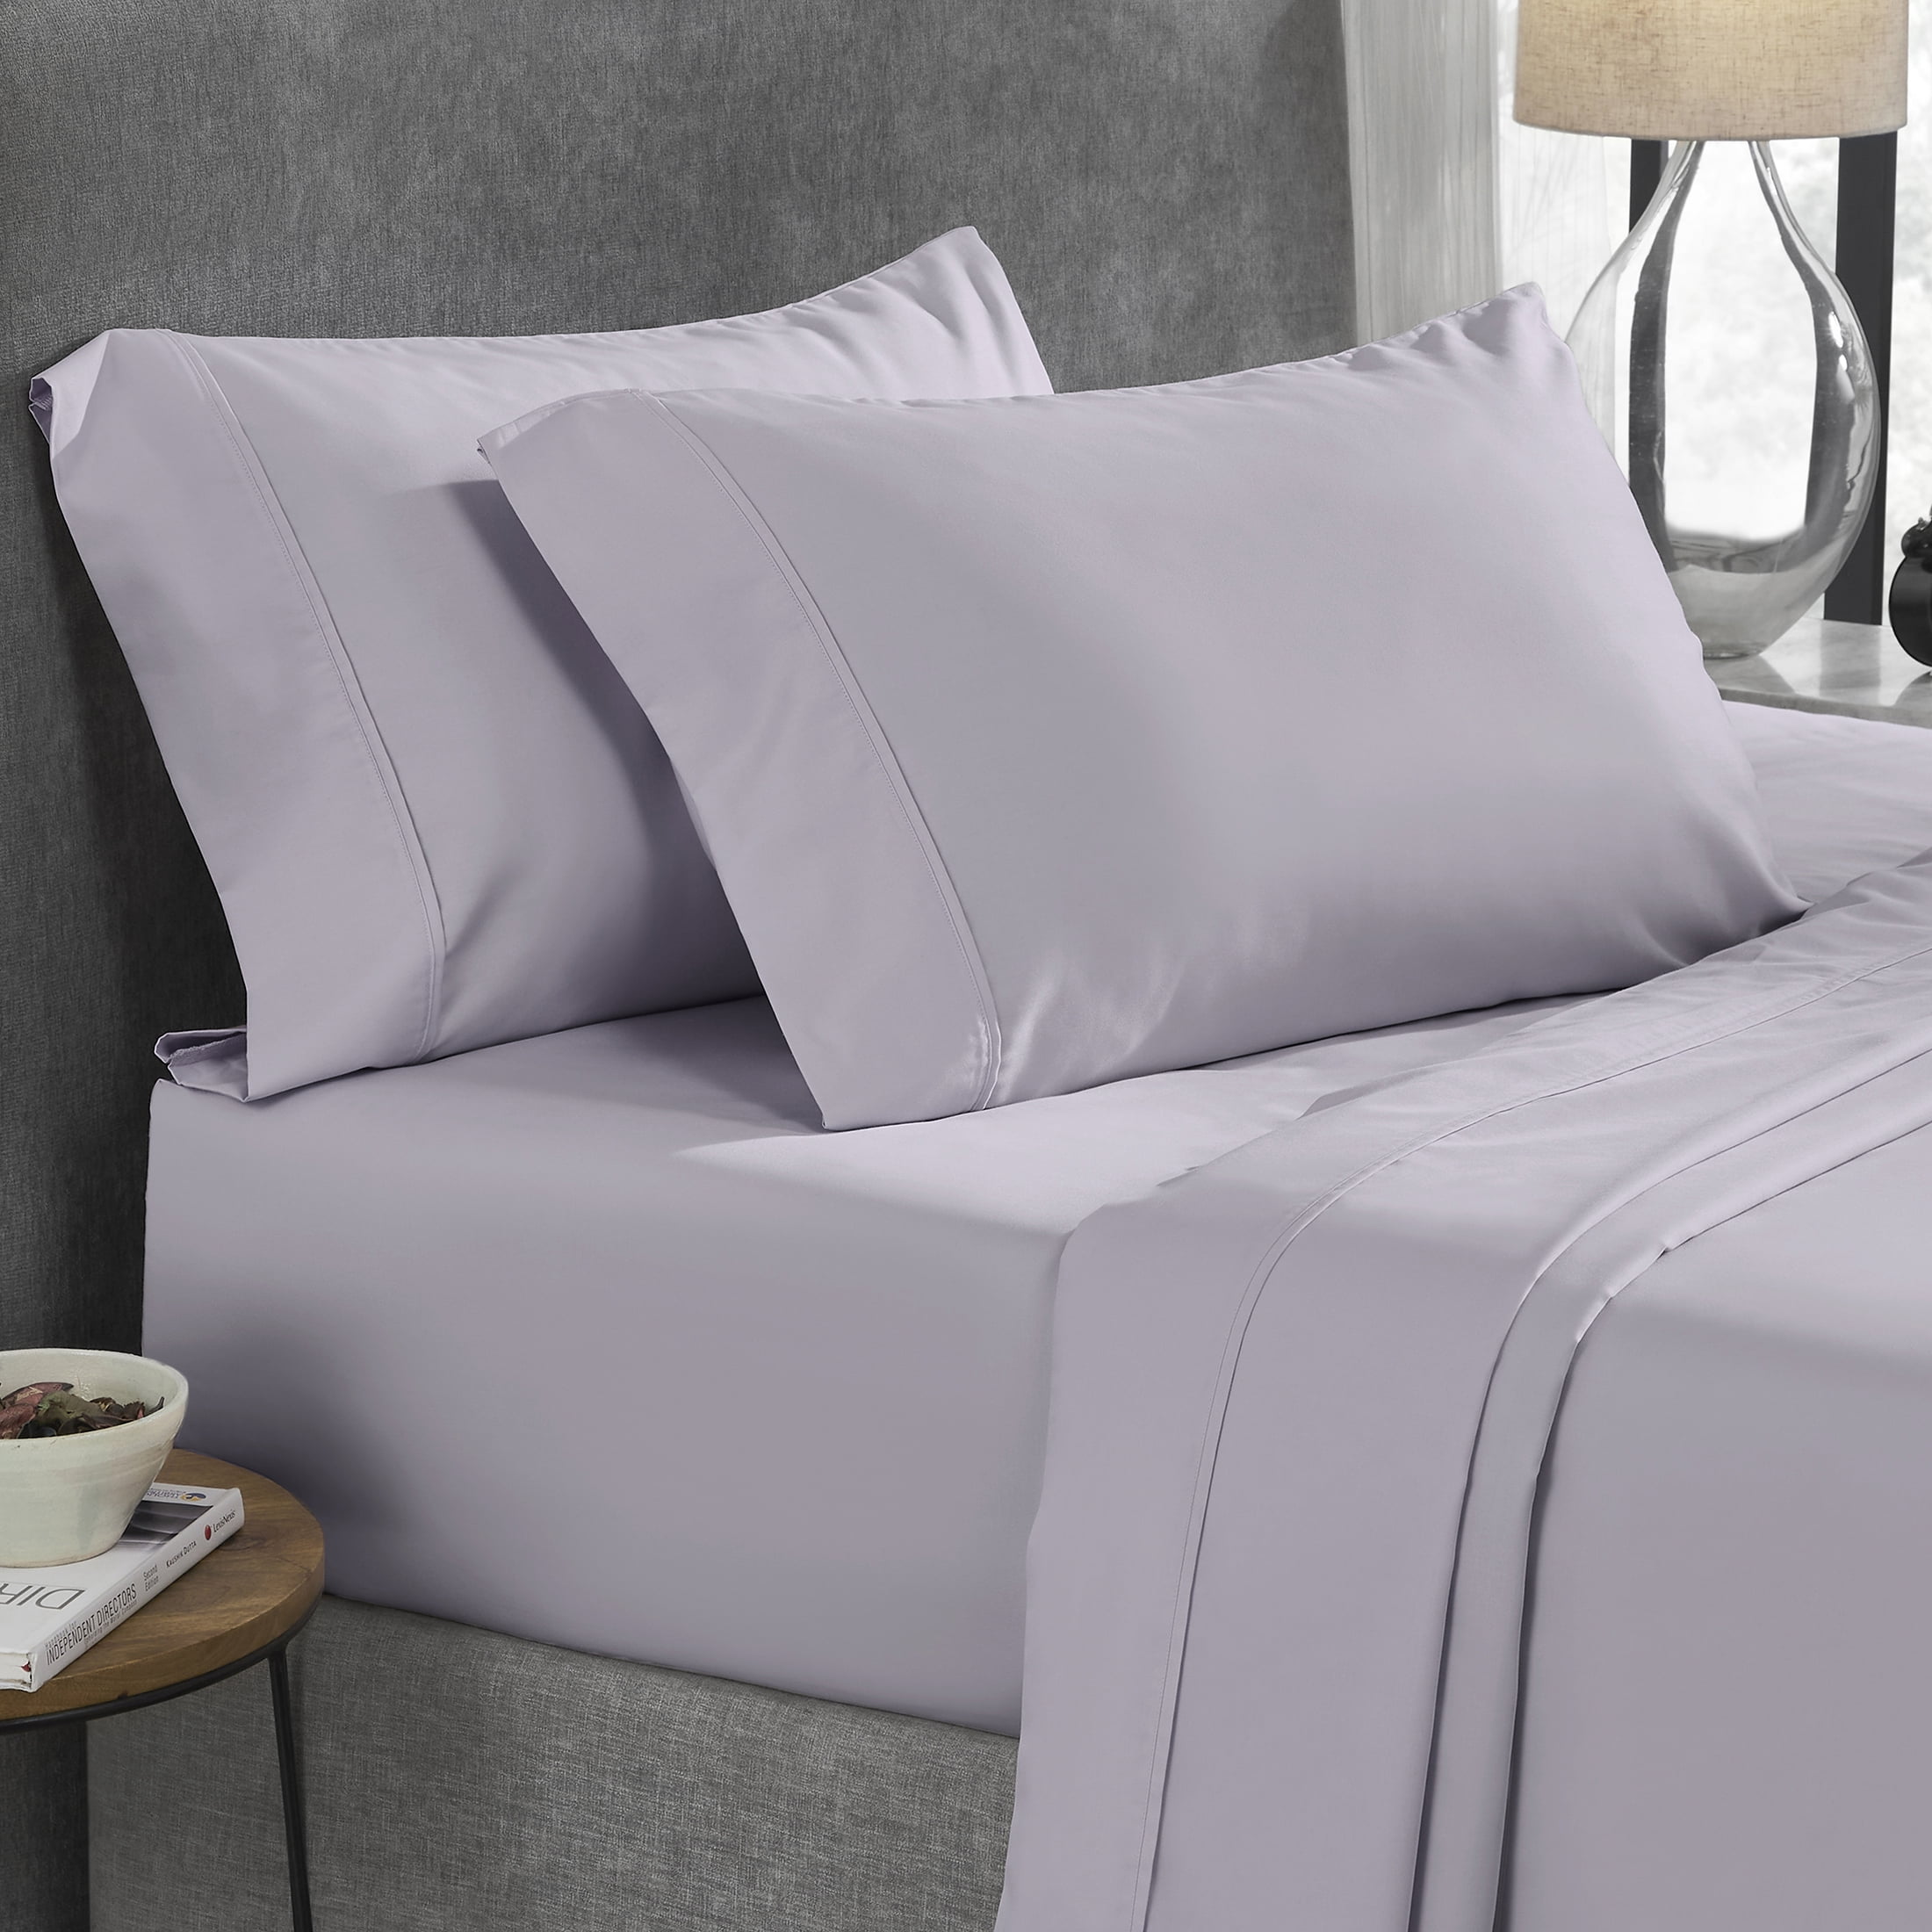 Details about   New FULL 100% Cotton Percale Sheet Set Mainstays 200 Thread Count 4 Pieces 